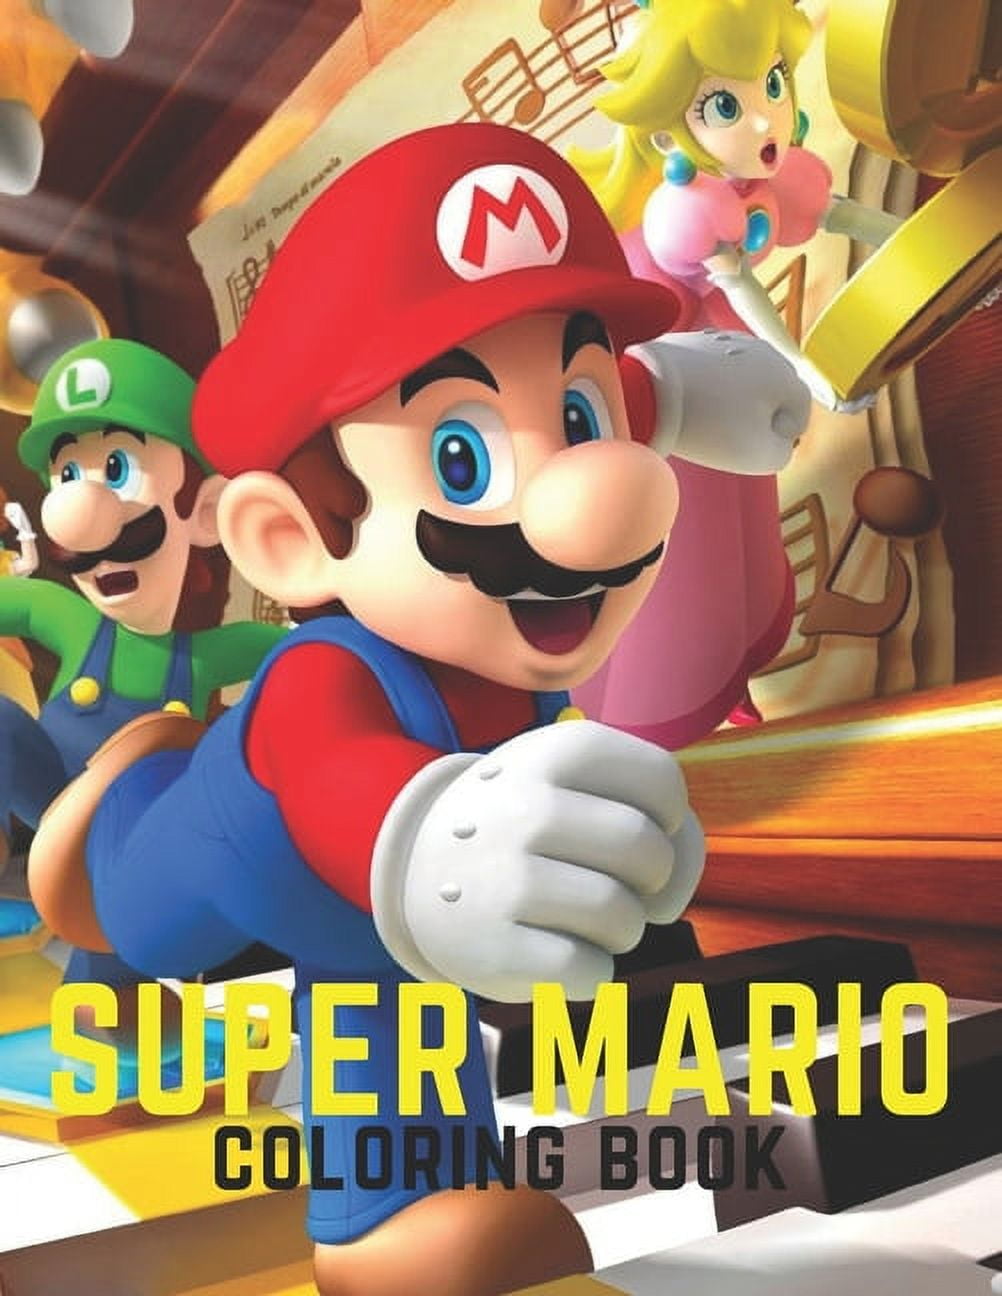 Super Mario Coloring Book: A Fabulous Coloring Book For Adults For  Relaxation And Stress Relief . Plenty Of Super Mario Illustrations coloring  pages